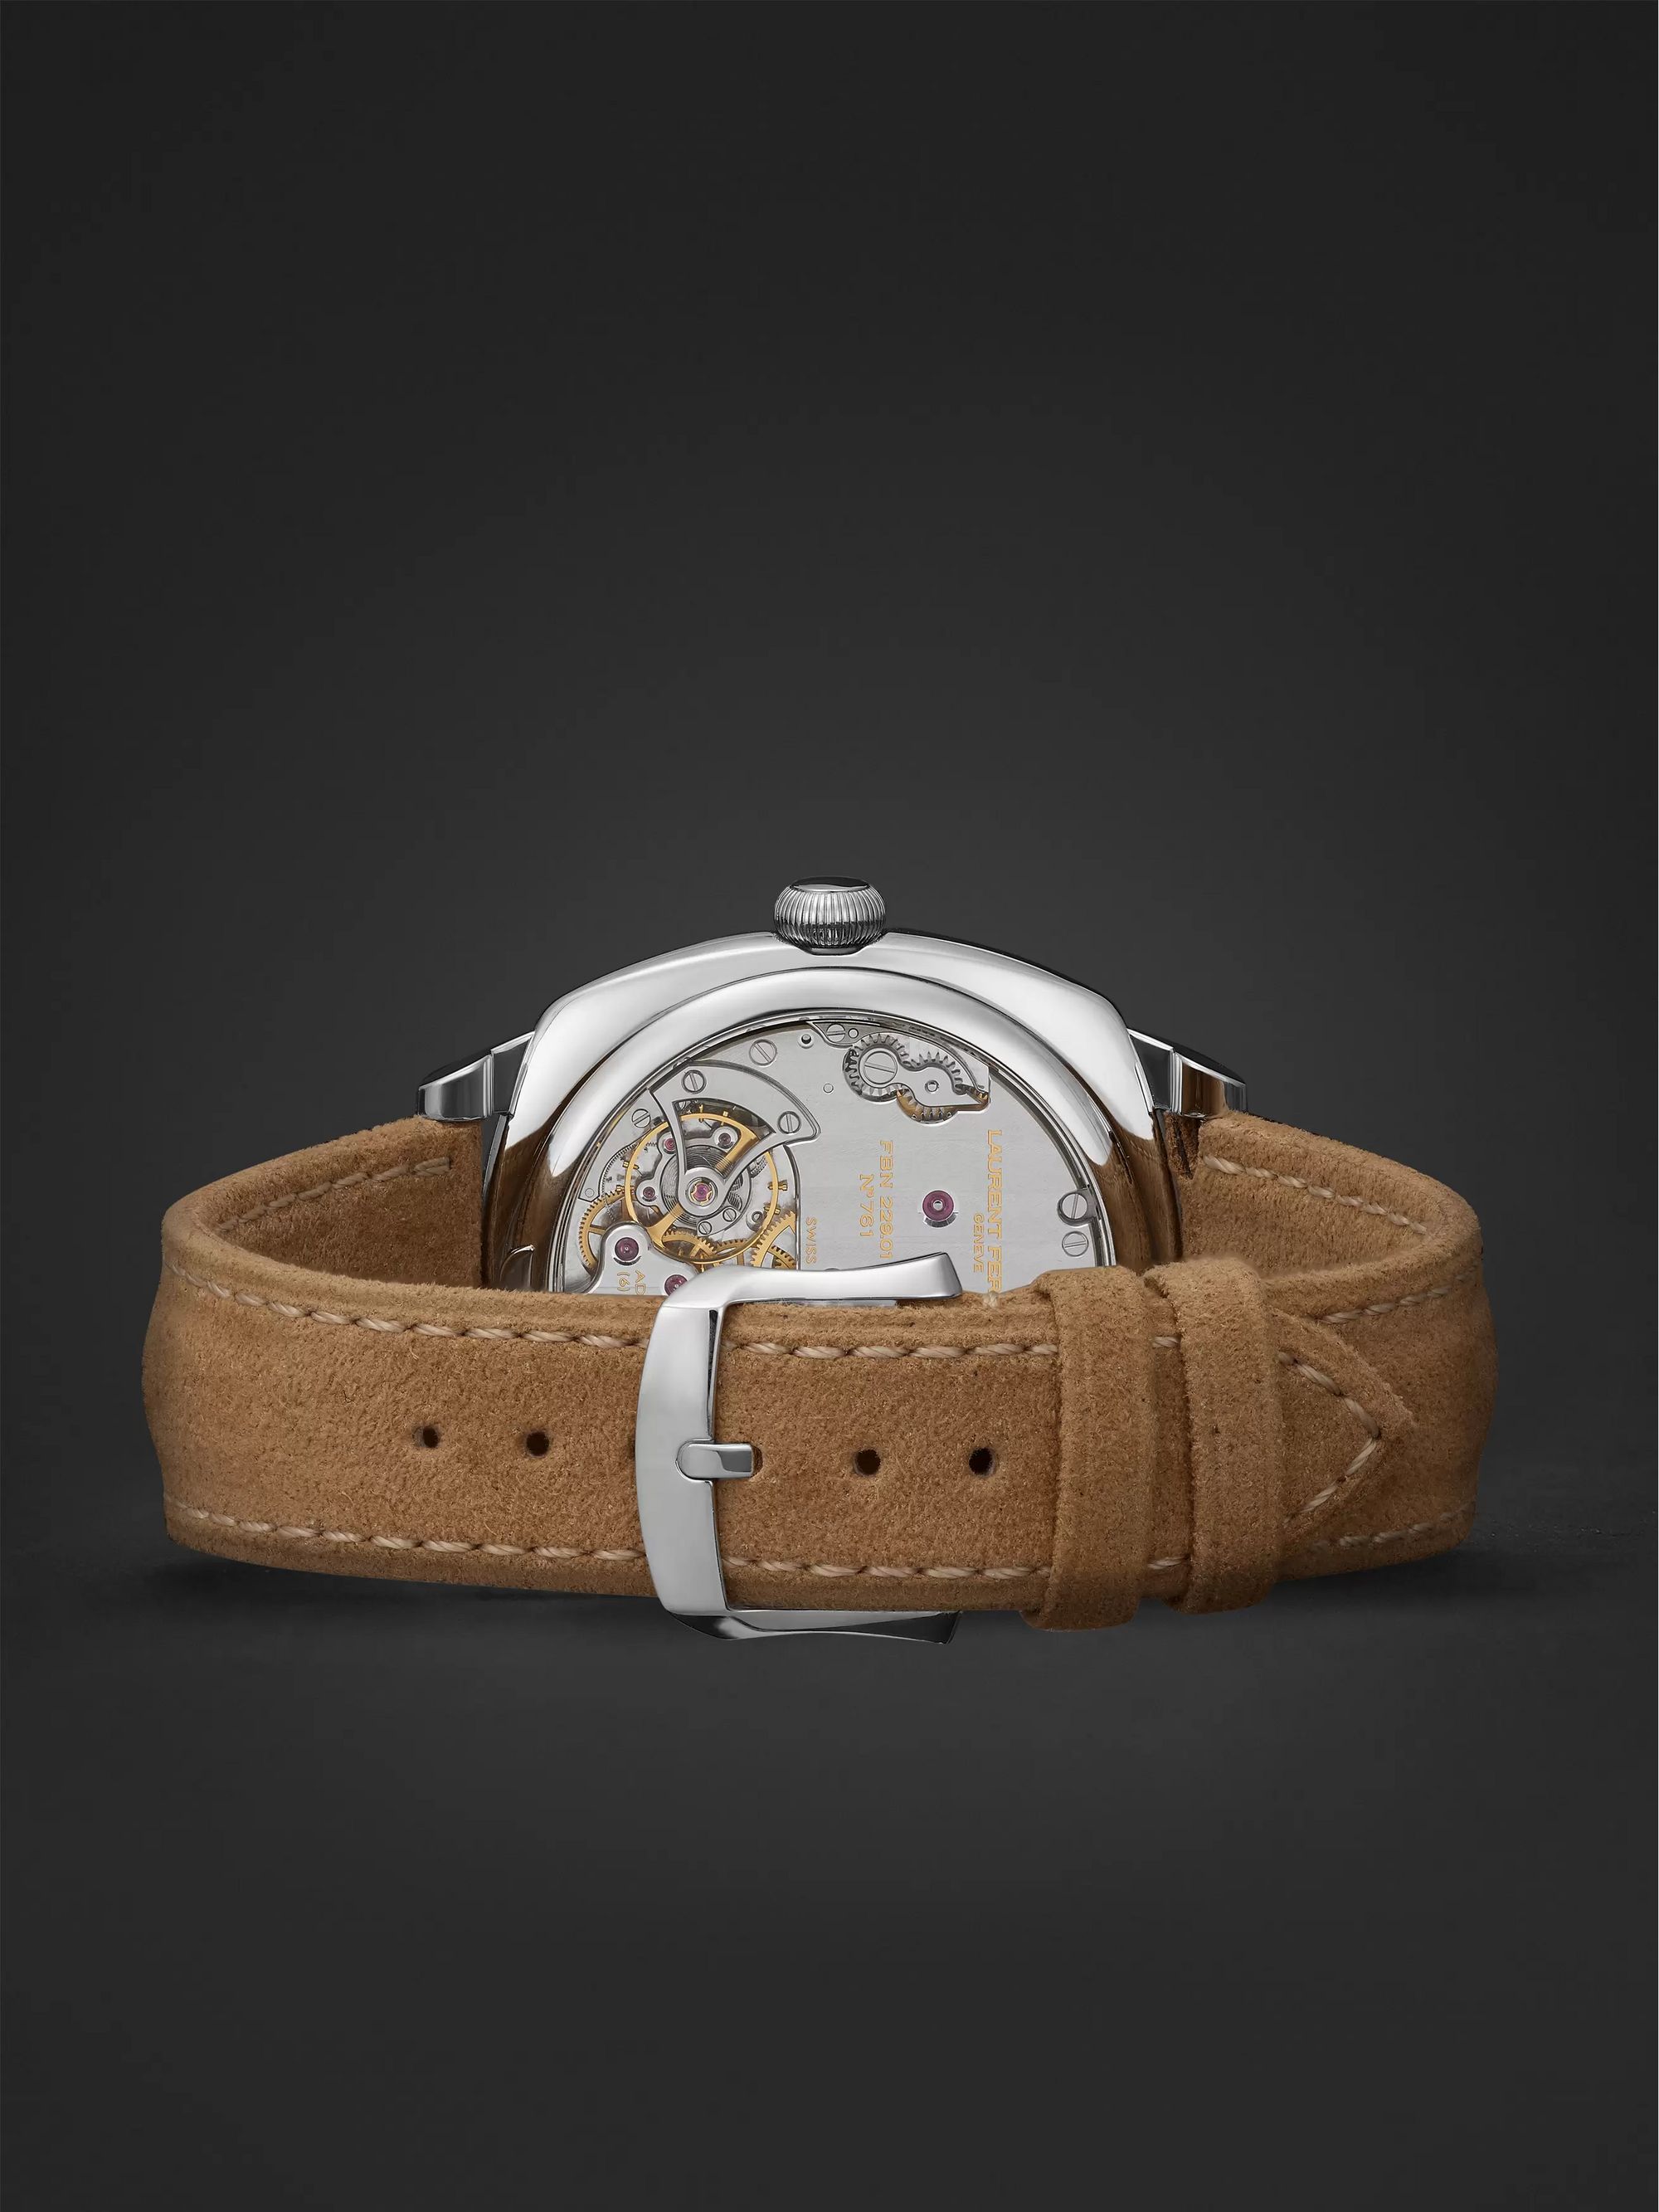 Laurent Ferrier Square Automatic 41mm Stainless Steel and Alcantara Watch, Ref. No. LCF013.AC.N1G.1